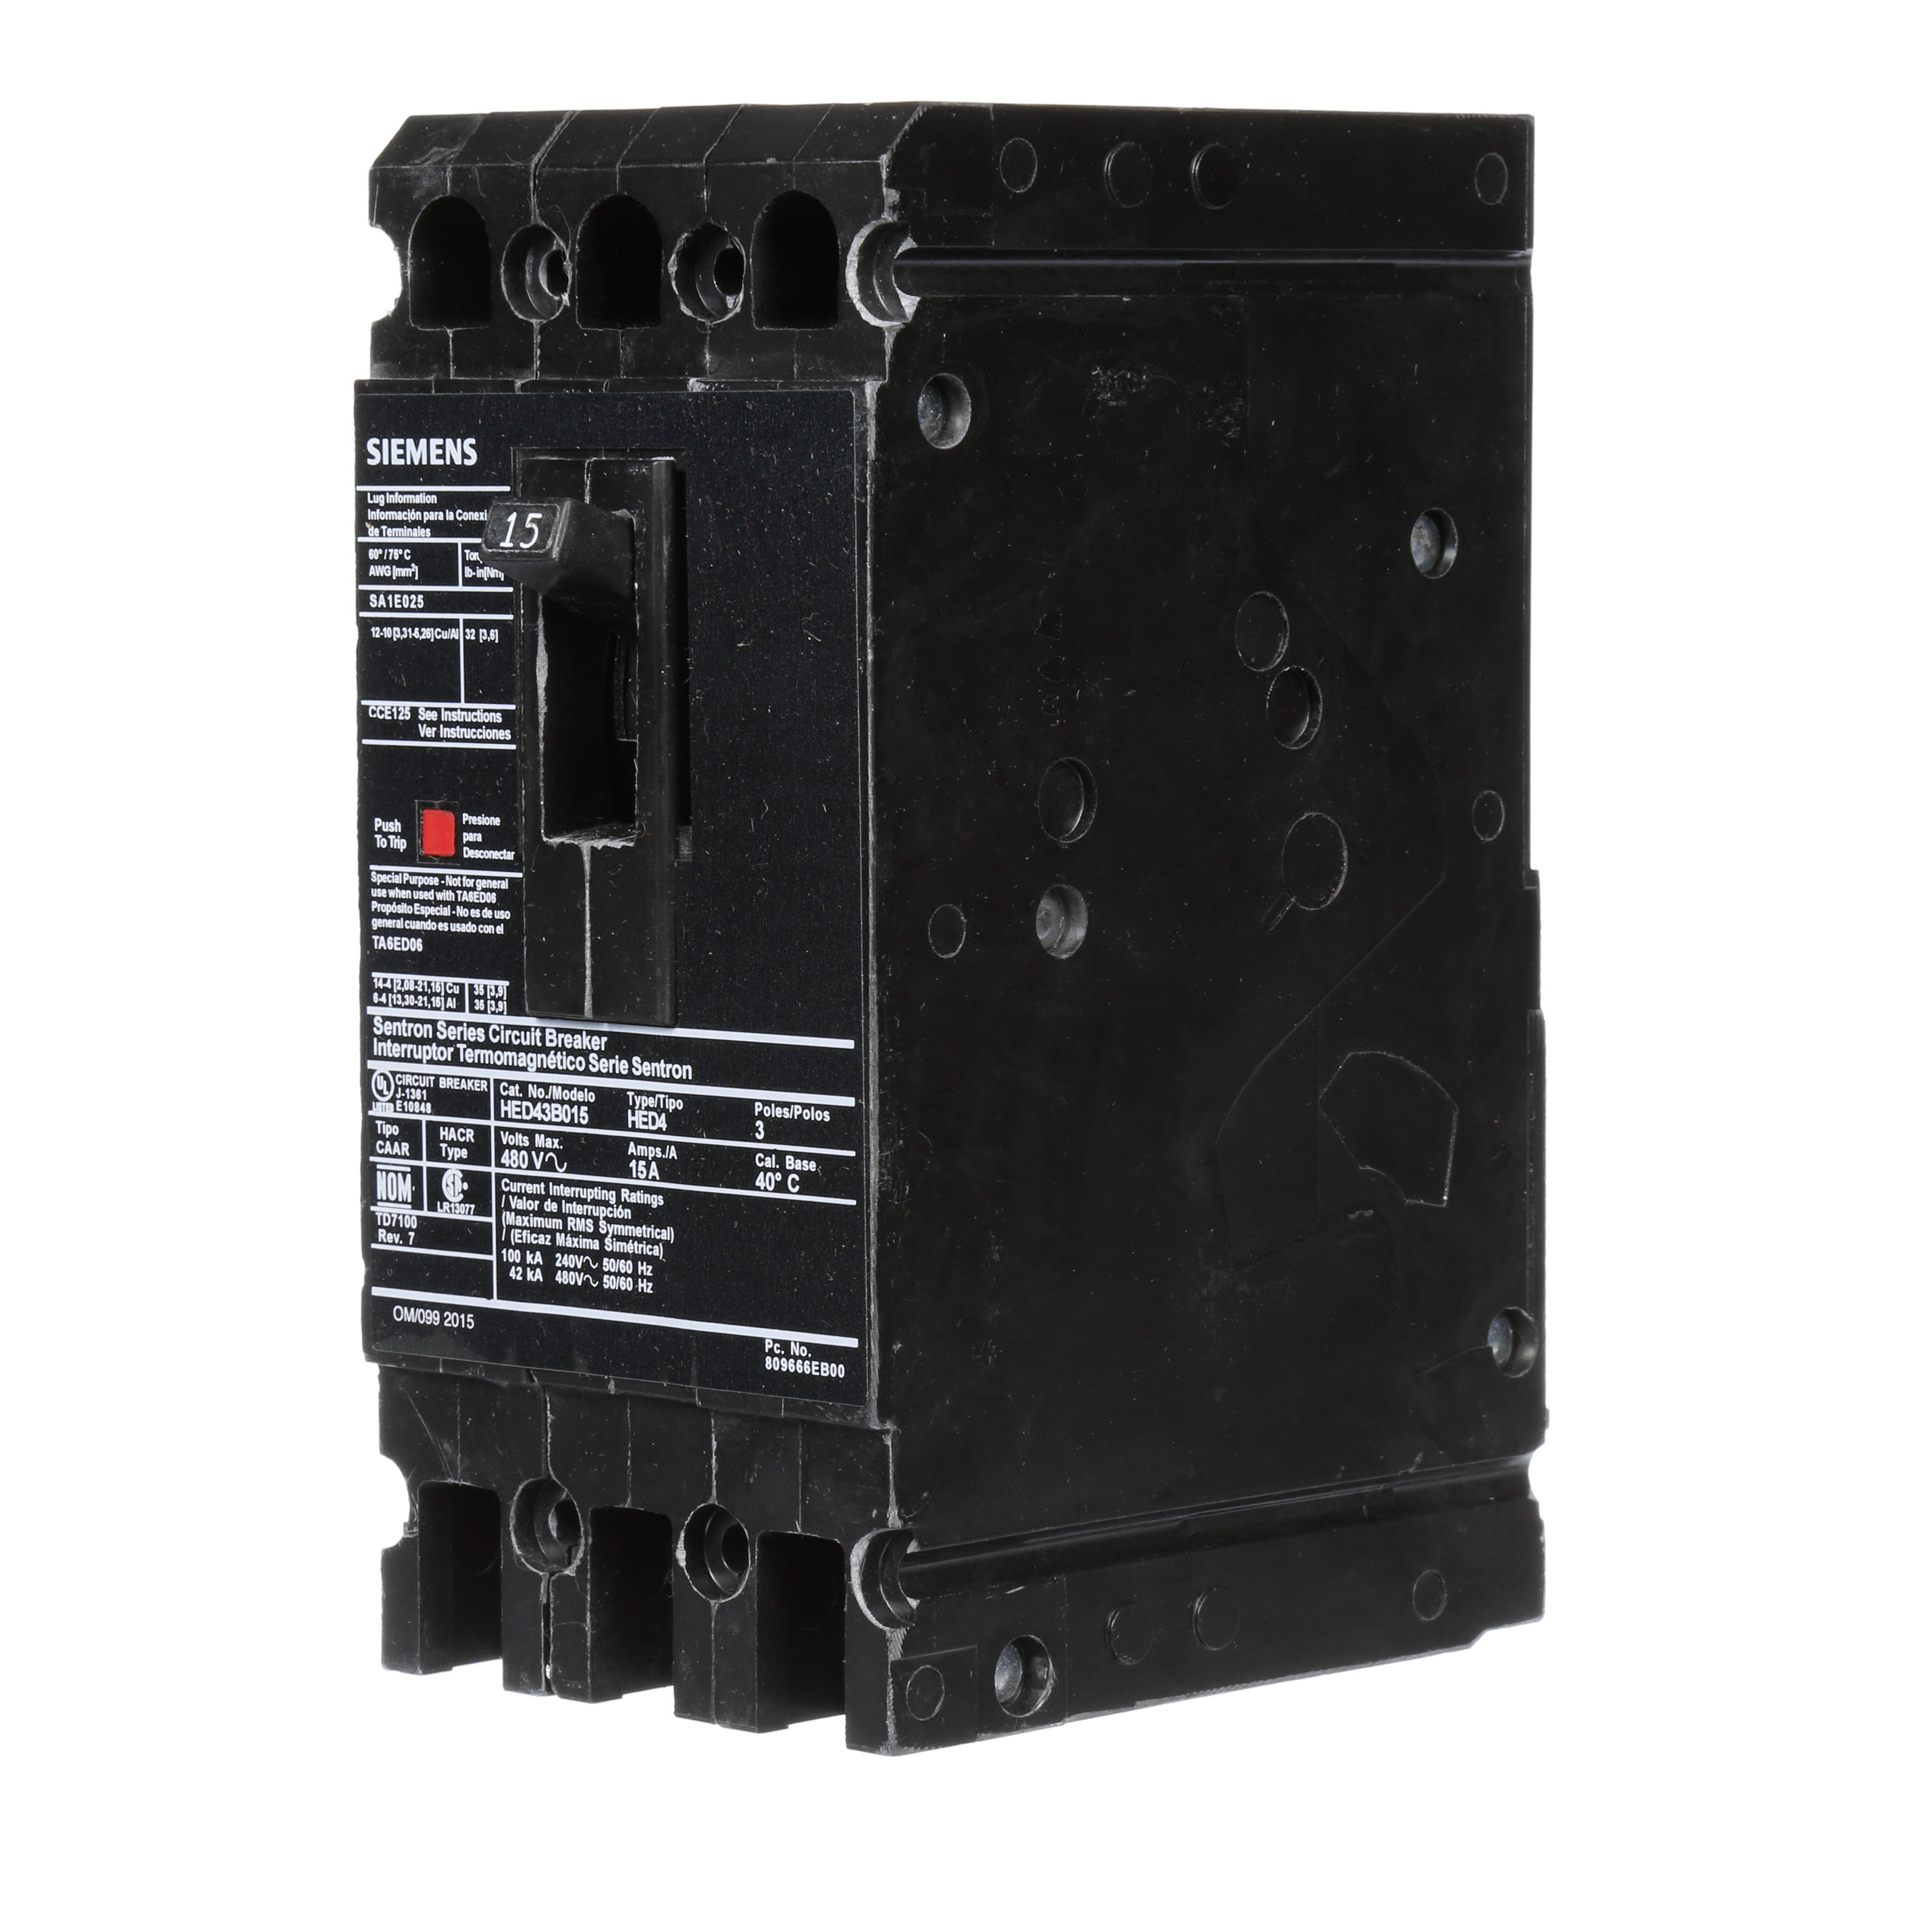 SIEMENS LOW VOLTAGE SENTRON MOLDED CASE CIRCUIT BREAKER WITH THERMAL - MAGNETICTRIP UNIT. STANDARD 40 DEG C BREAKER ED FRAME WITH HIGH BREAKING CAPACITY. 15A 3-POLE (42KAIC AT 480V). NON-INTERCHANGEABLE TRIP UNIT. SPECIAL FEATURES LOAD LUGS ONLY (SA1E025) WIRE RANGE 14 - 10AWG (CU) / 12 - 10AWG (AL). DIMENSIONS (W x H x D) IN 3.00 x 6.4 x 3.92.